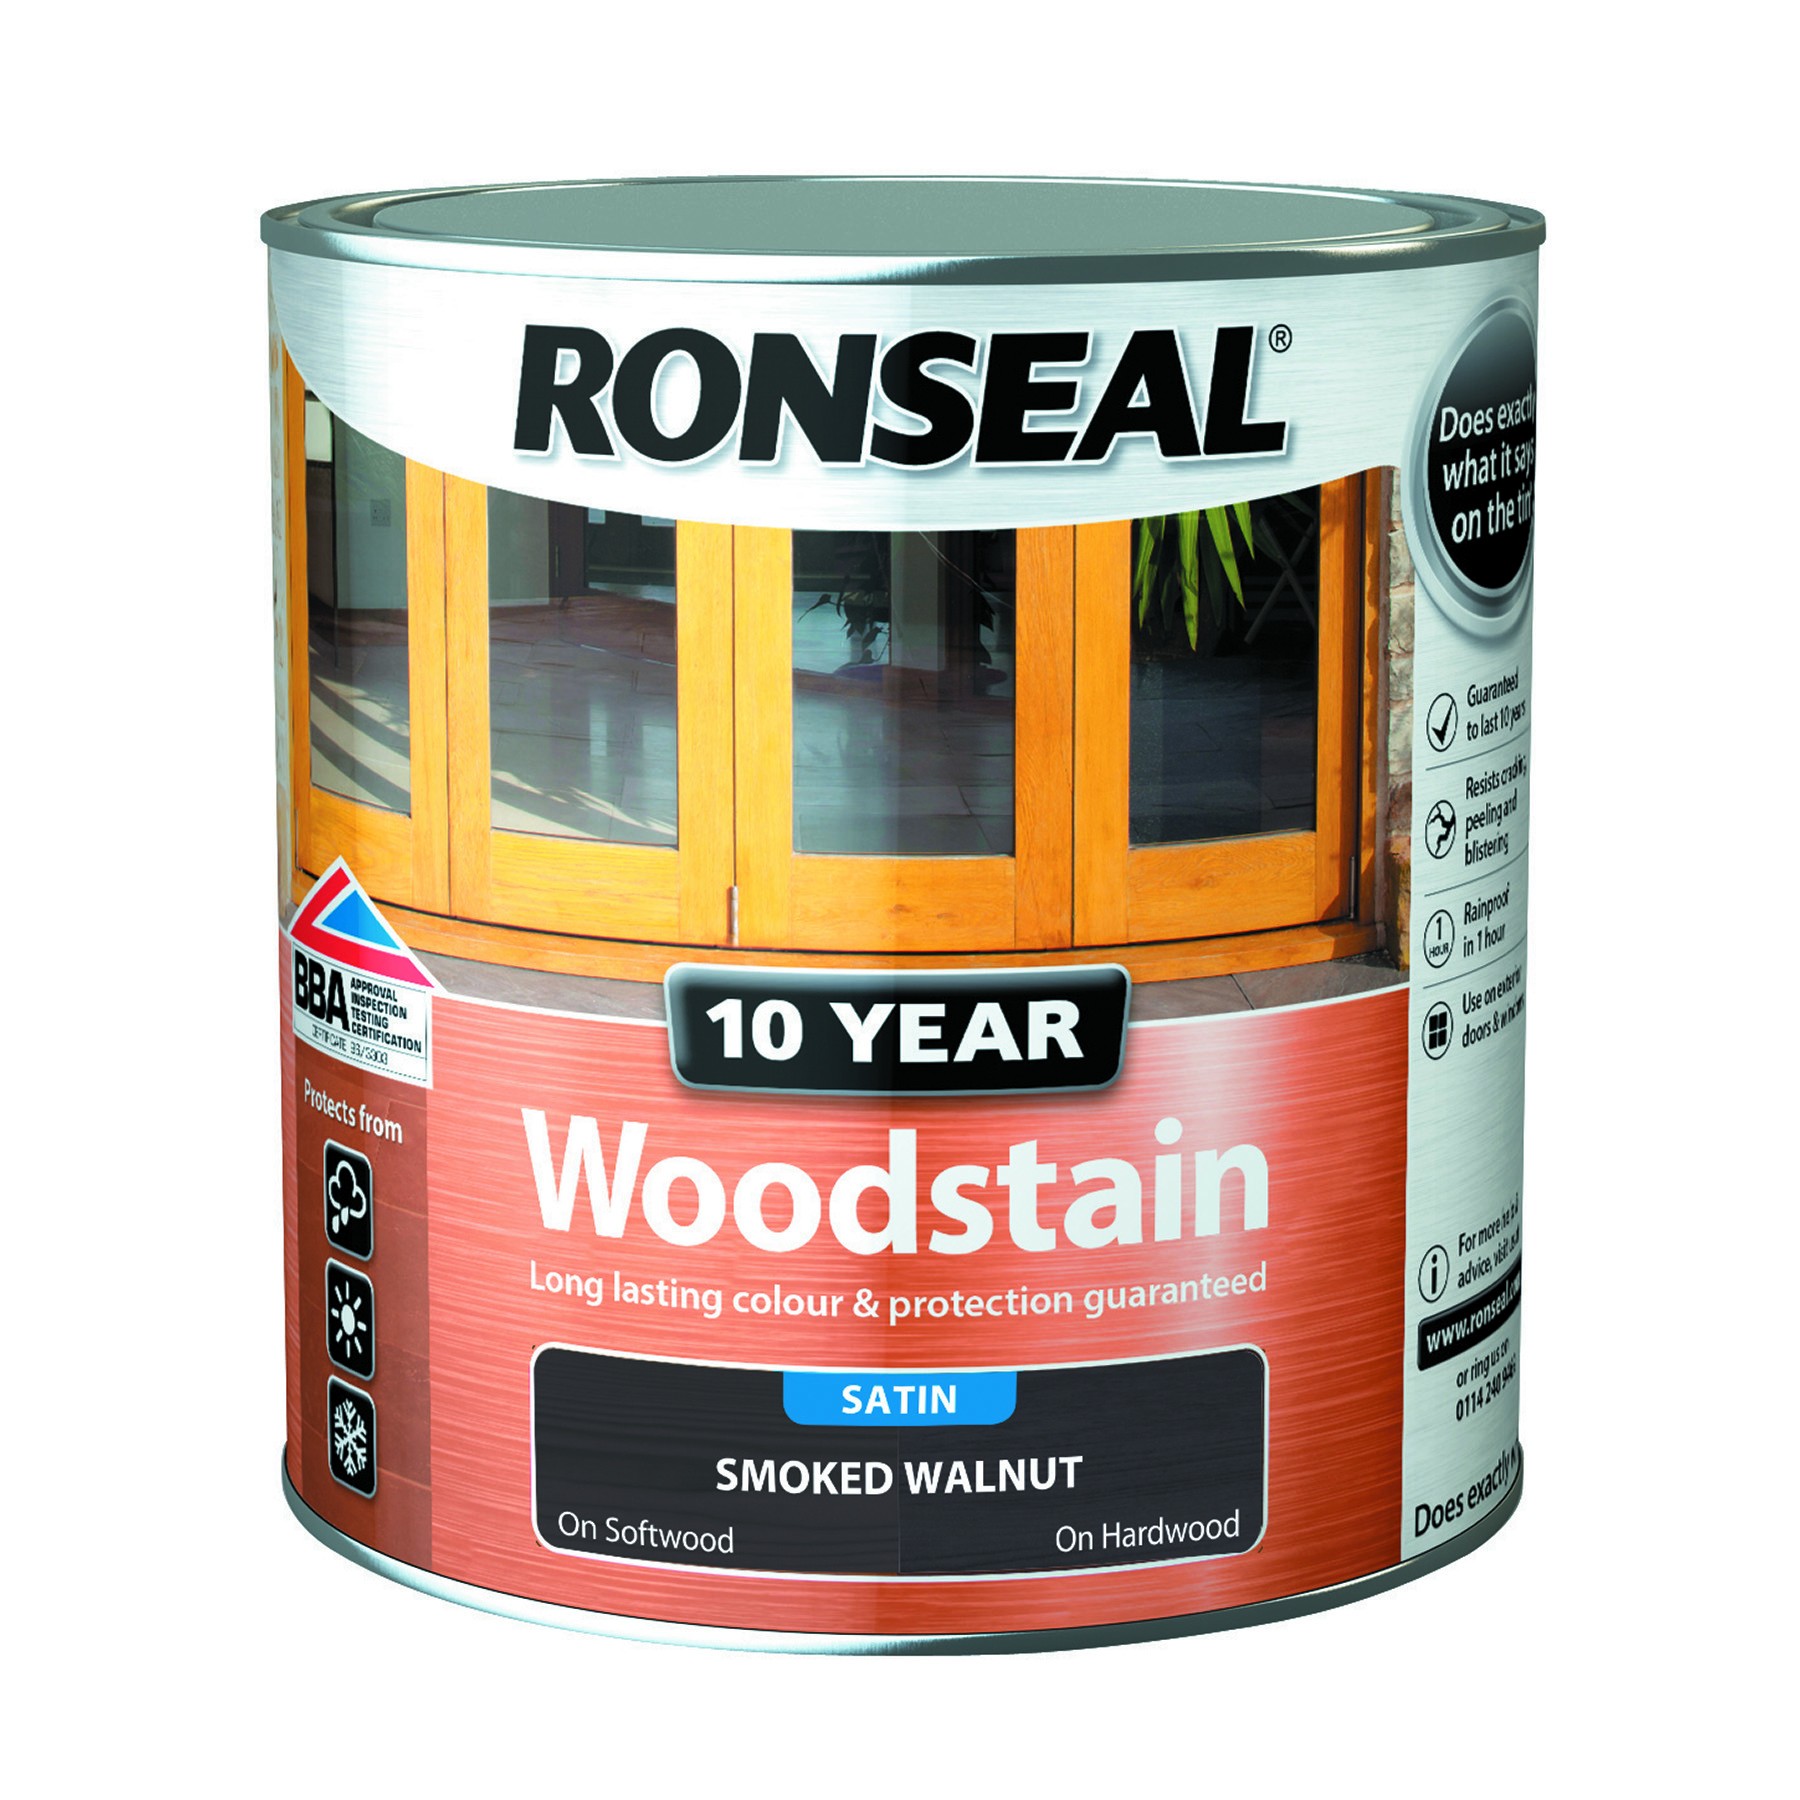 Ronseal 10 Year Woodstain 750ml Satin Antique Pine [RON38676]